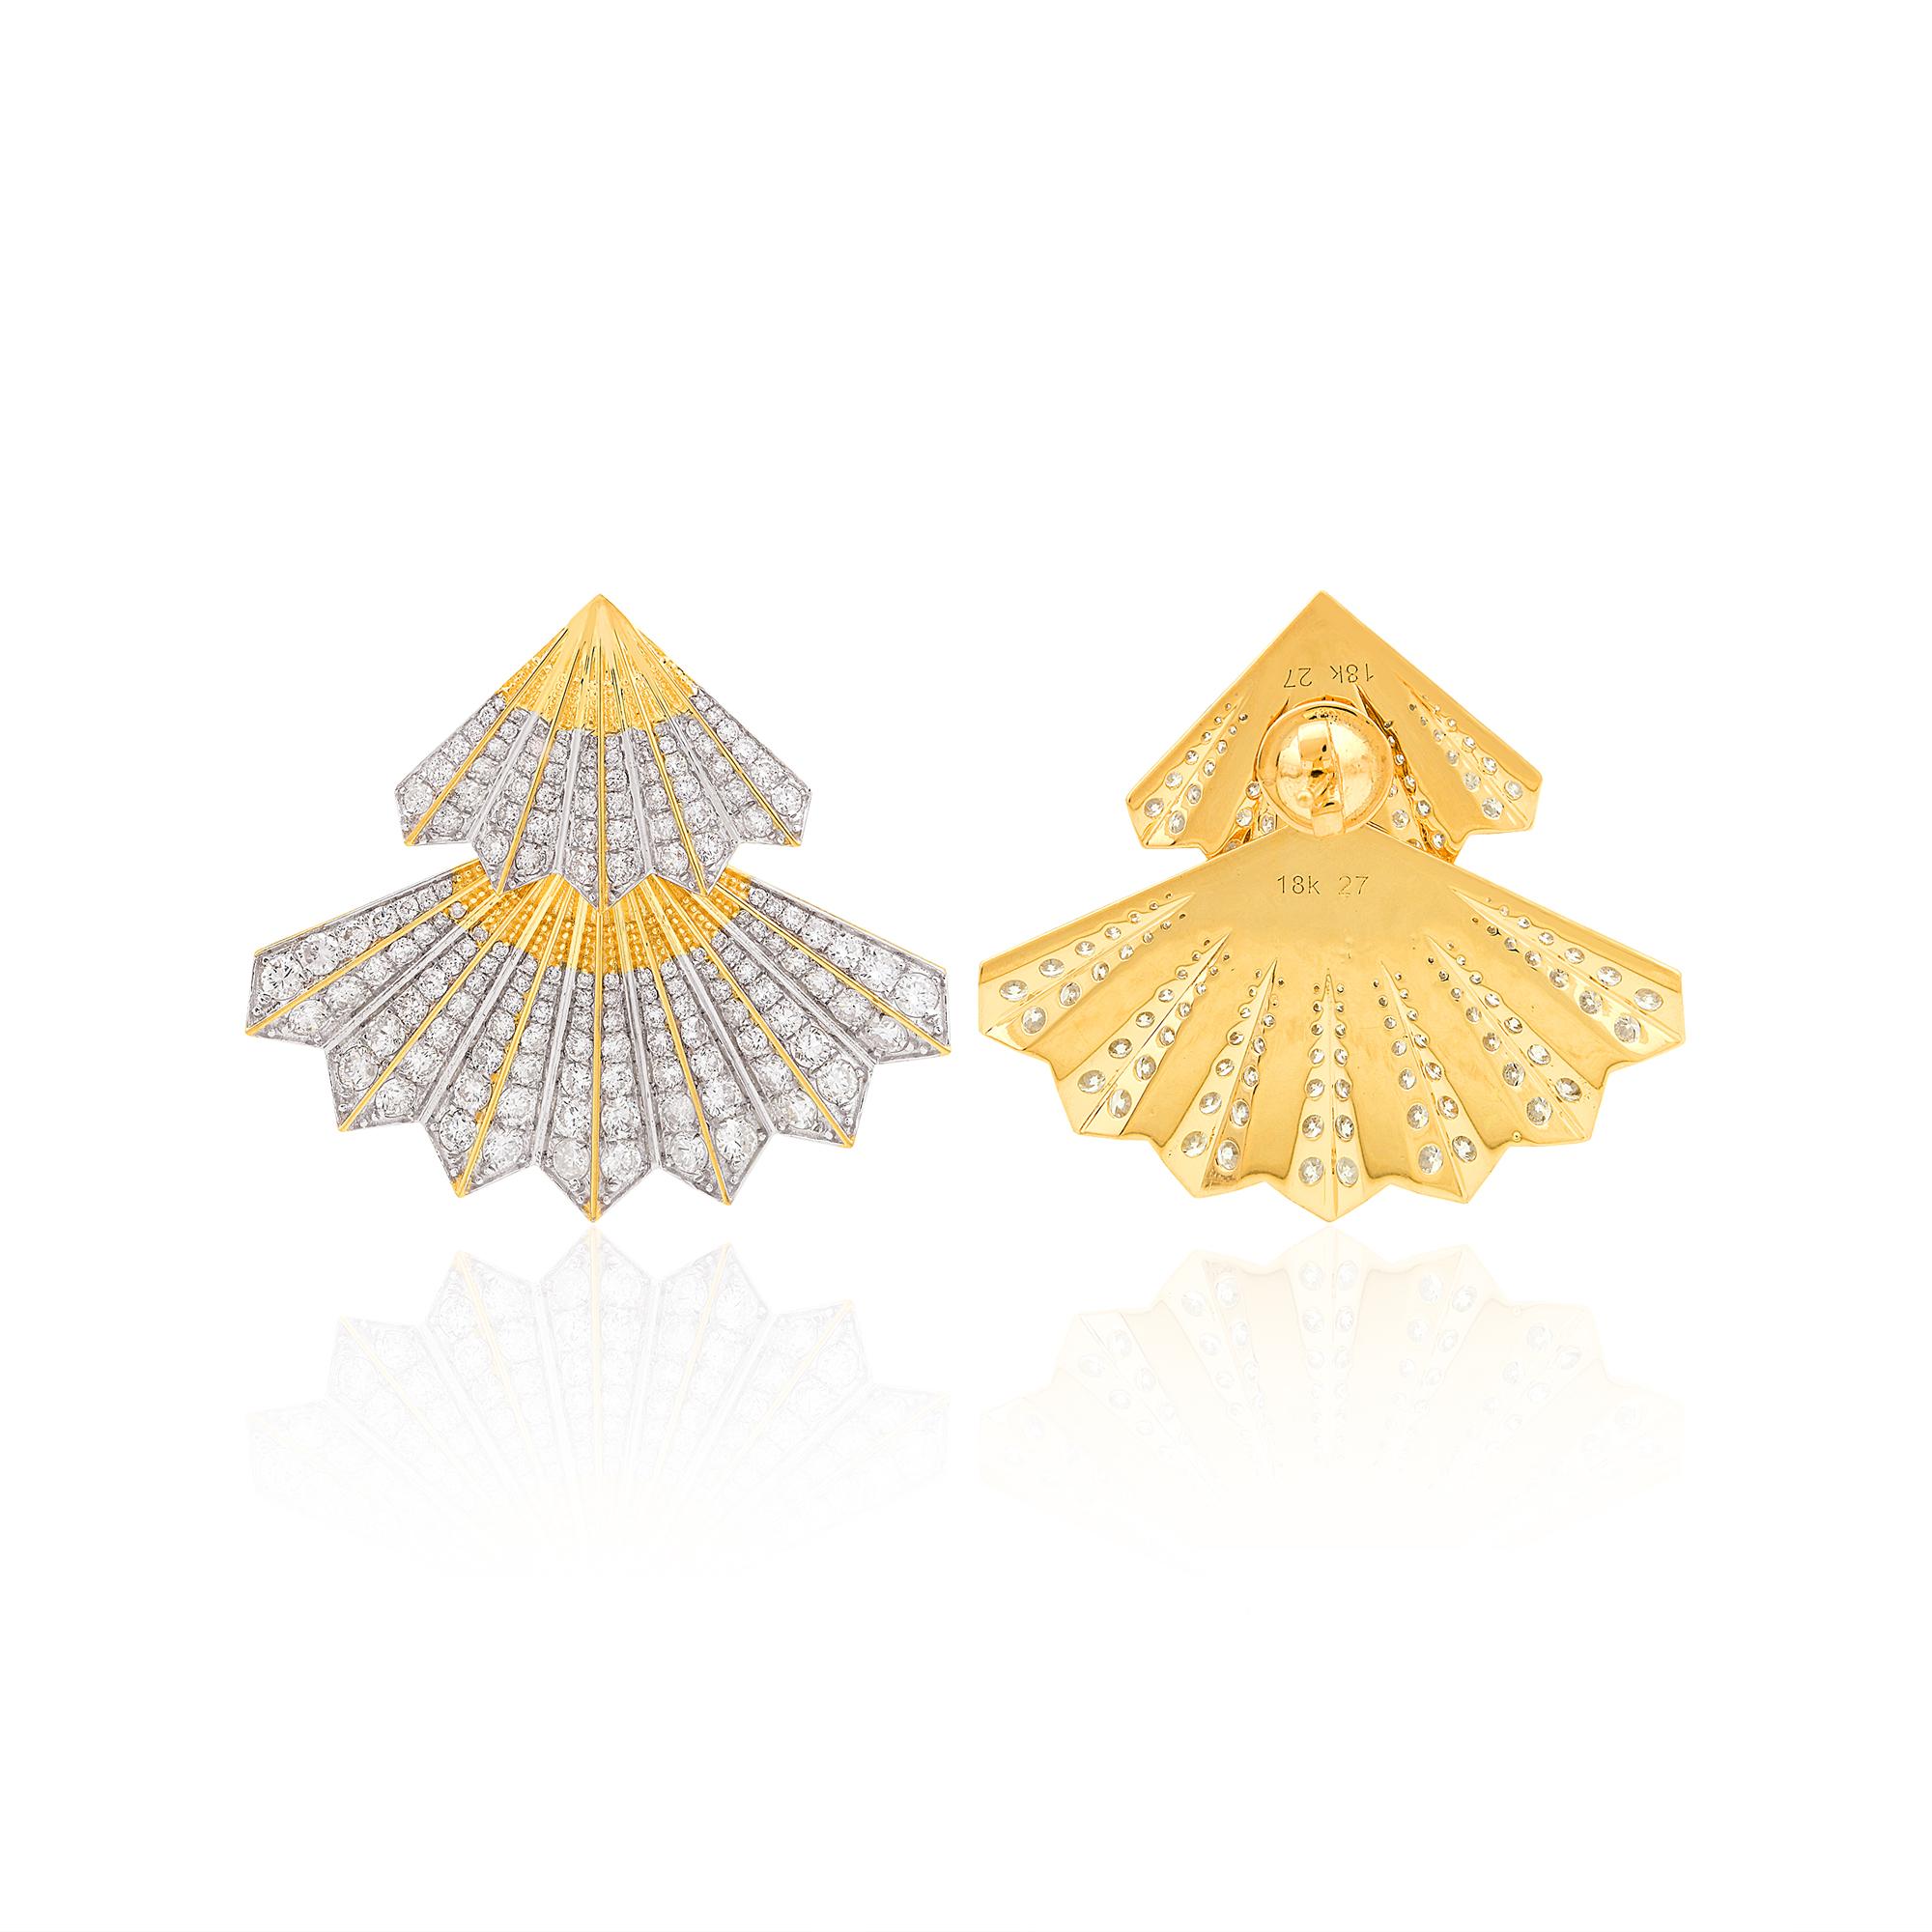 Item Code:- SEE-11616
Gross Weight :-14.19 gm
14k Solid Yellow Gold Weight :- 13.09 gm
Natural Diamond Weight :- 5.50 ct.  ( AVERAGE DIAMOND CLARITY SI1-SI2 & COLOR H-I )
Earrings Size :- 31x37 mm (approx.)

✦ Sizing
.....................
We can